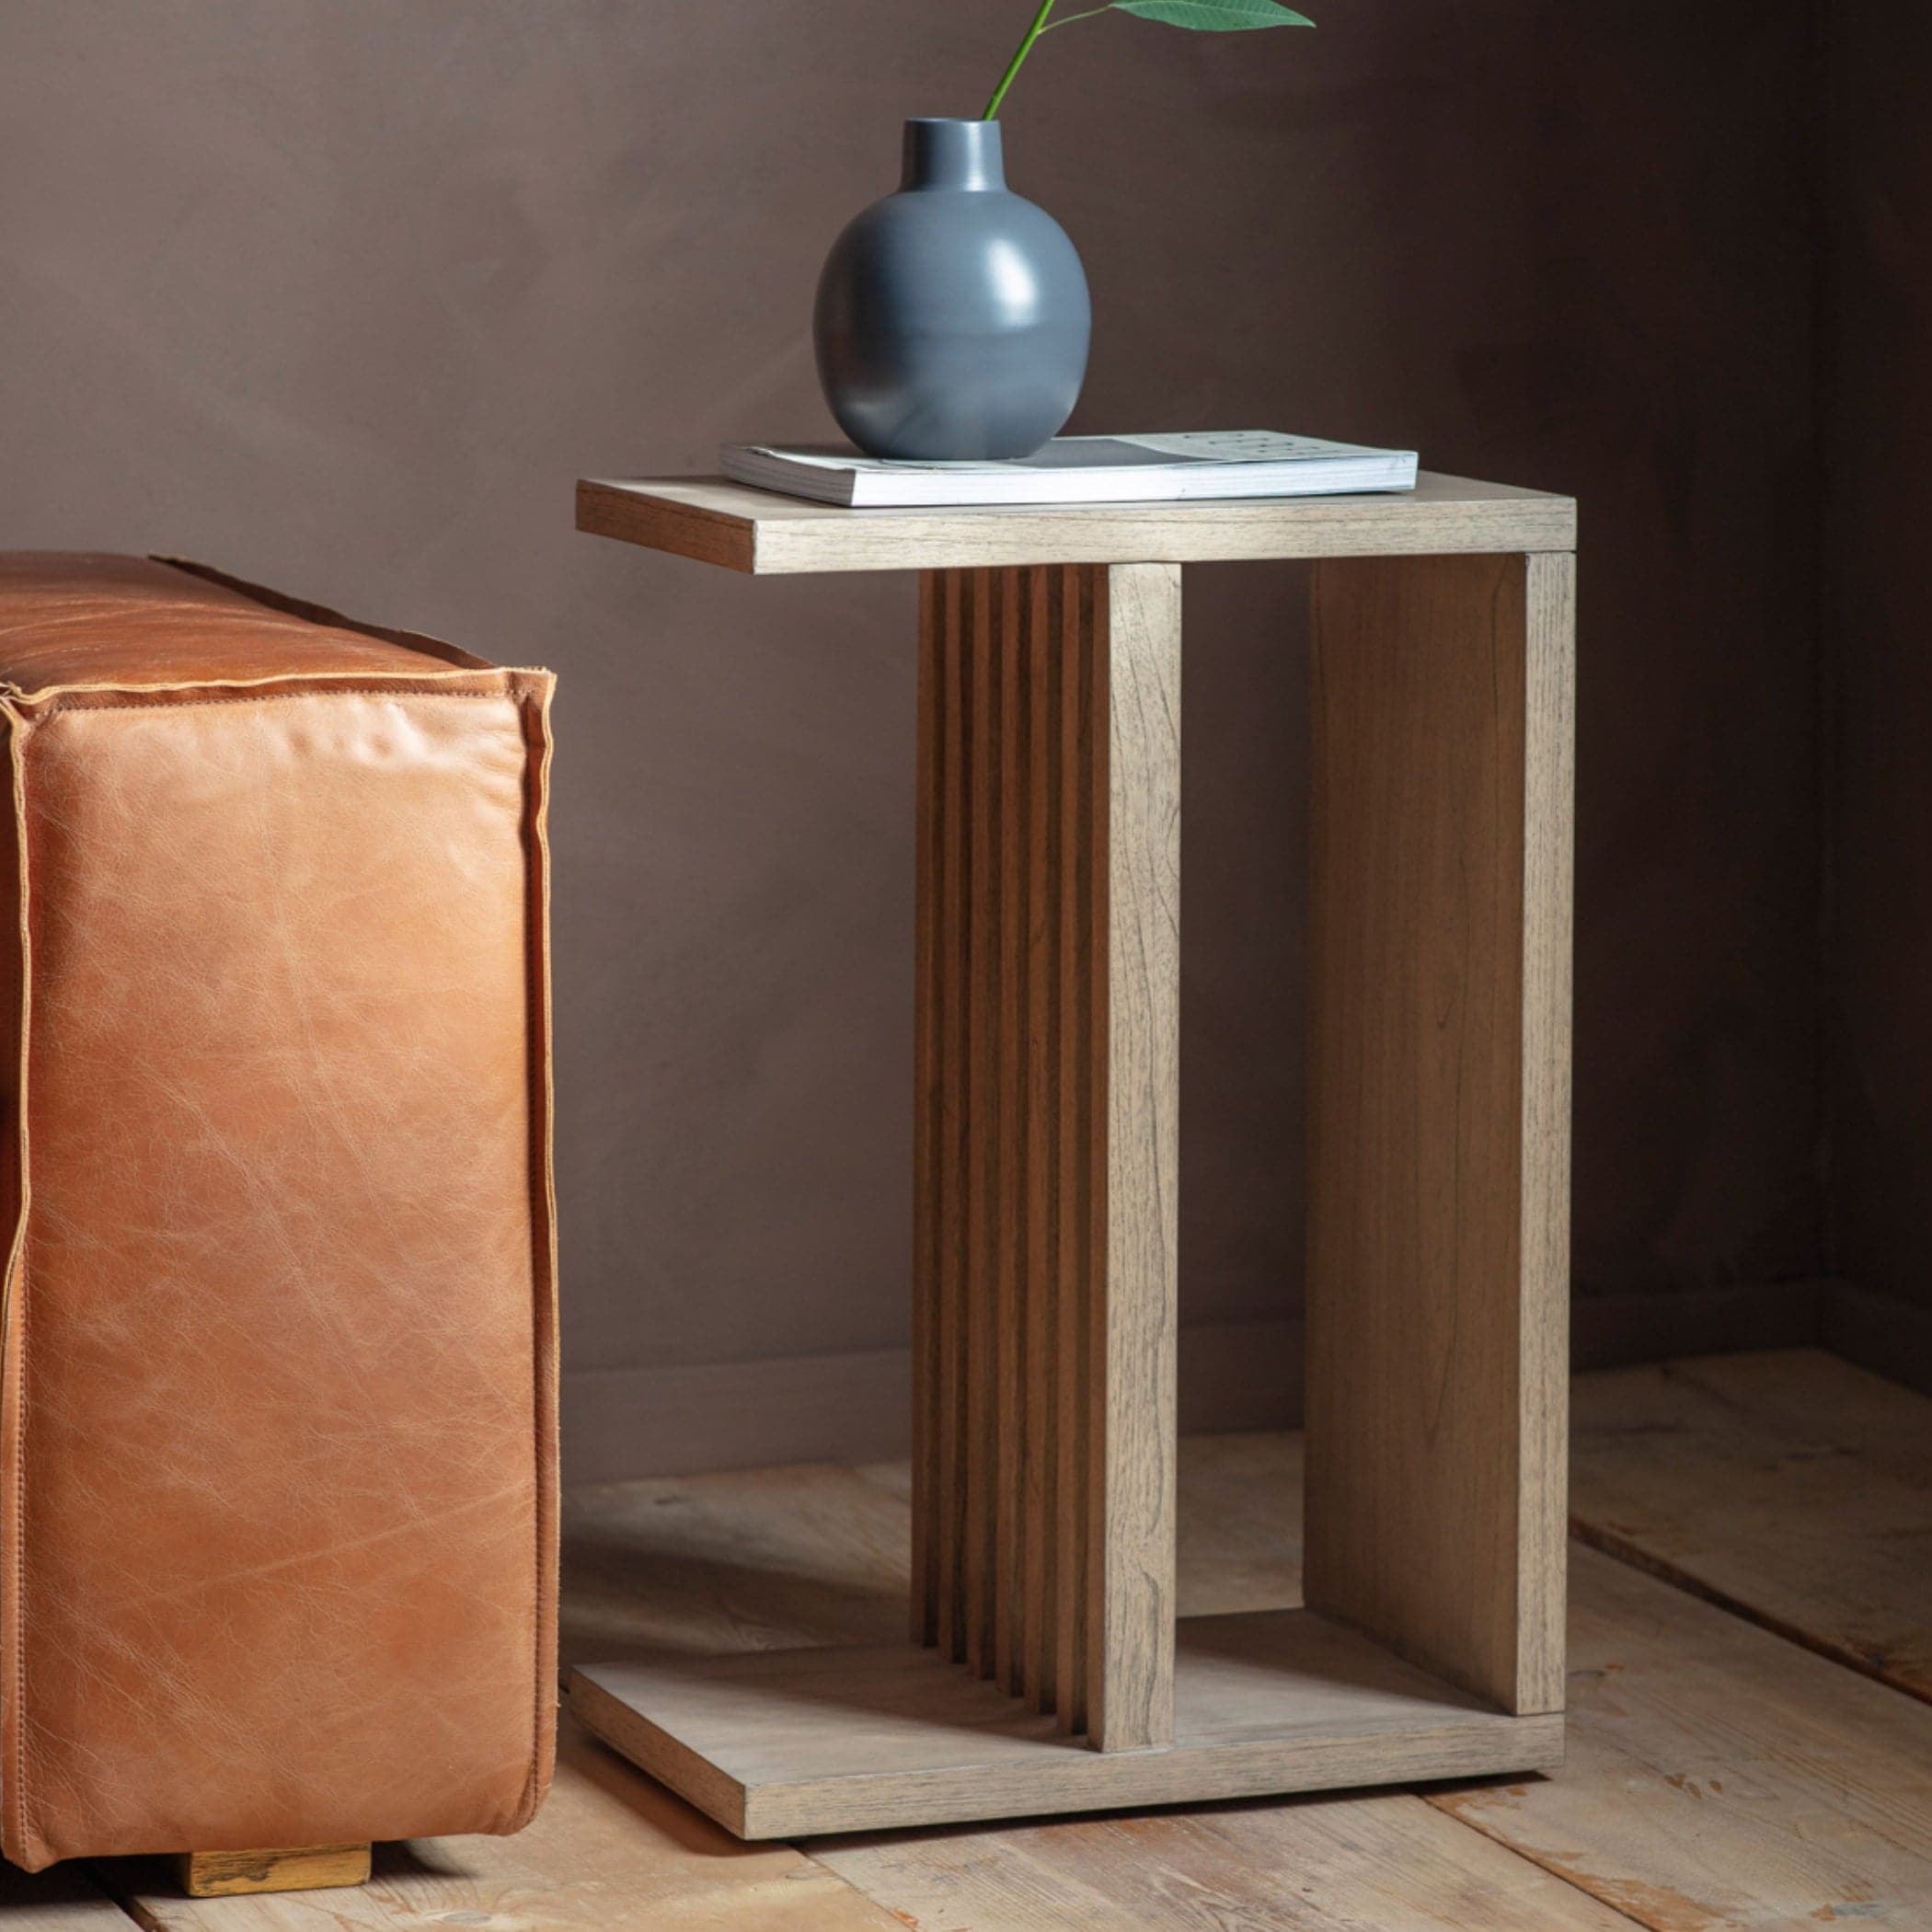 Slatted C Shape Ash Supper Side Table - The Farthing